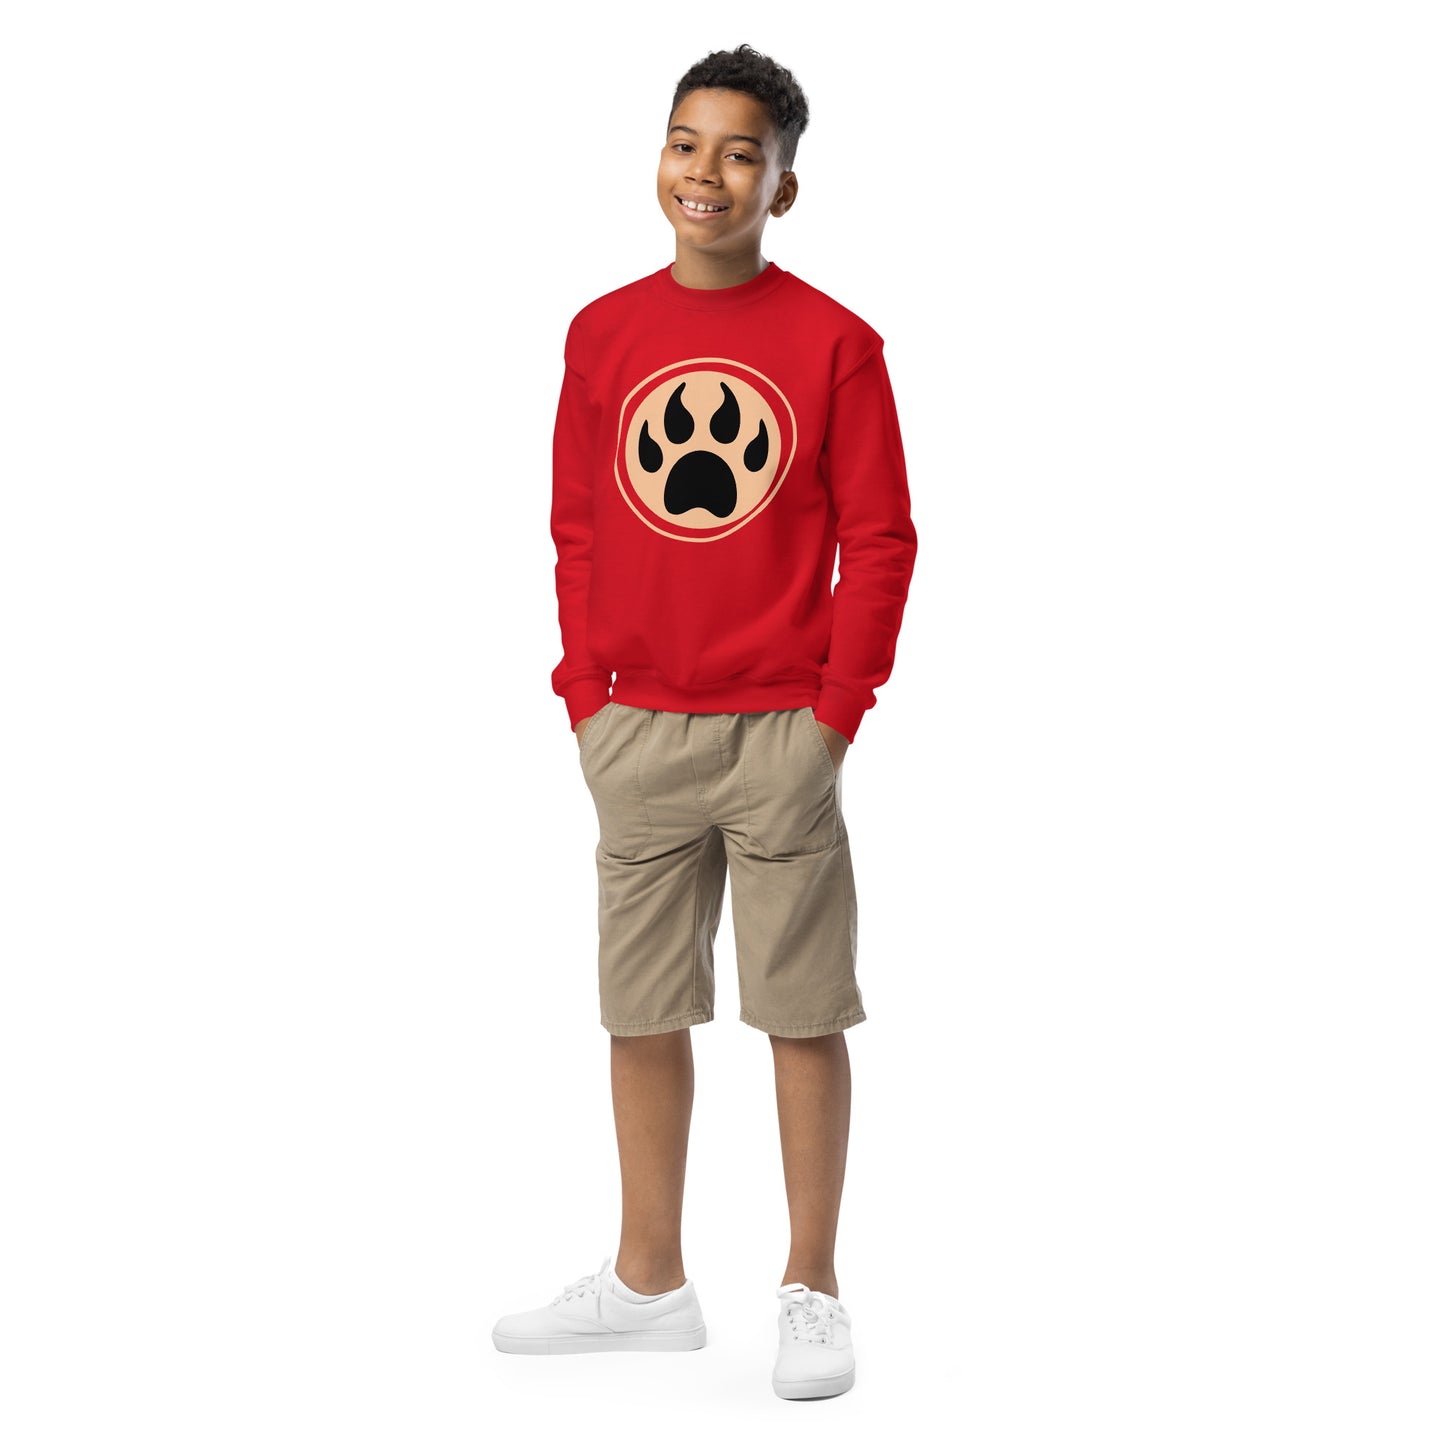 Youth with red sweatshirt and a print of a wolf claw